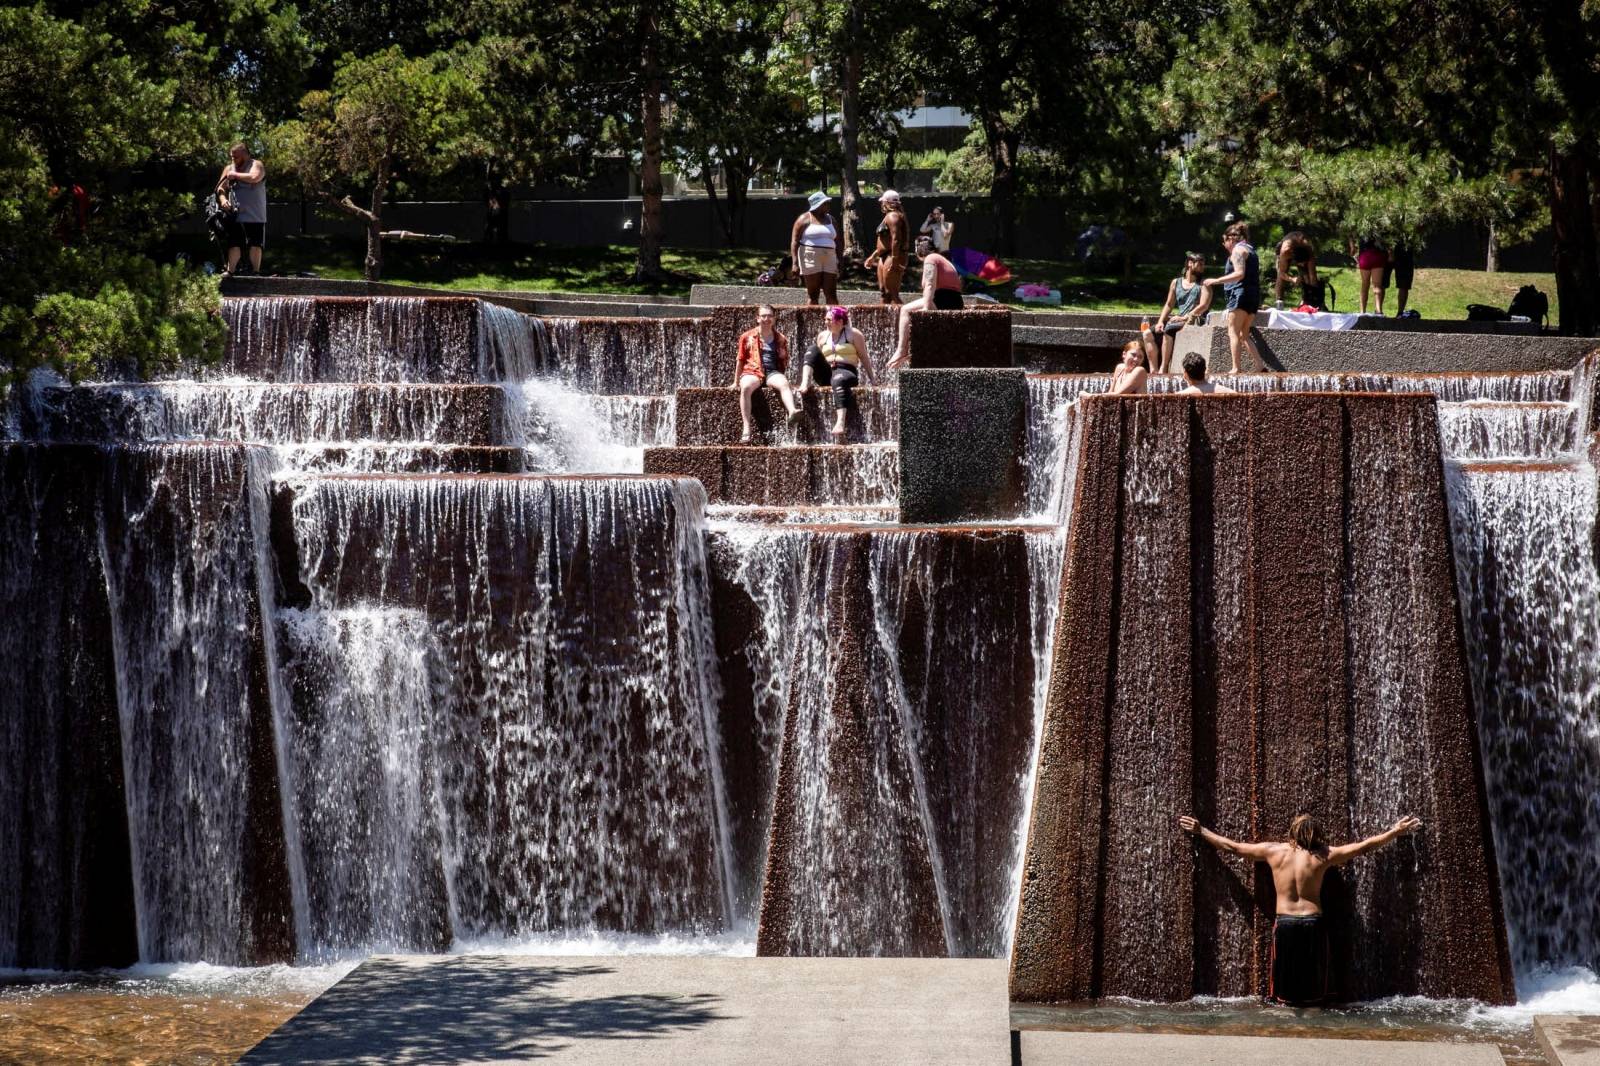 People cool off in a public fountain during hot weather in Portland